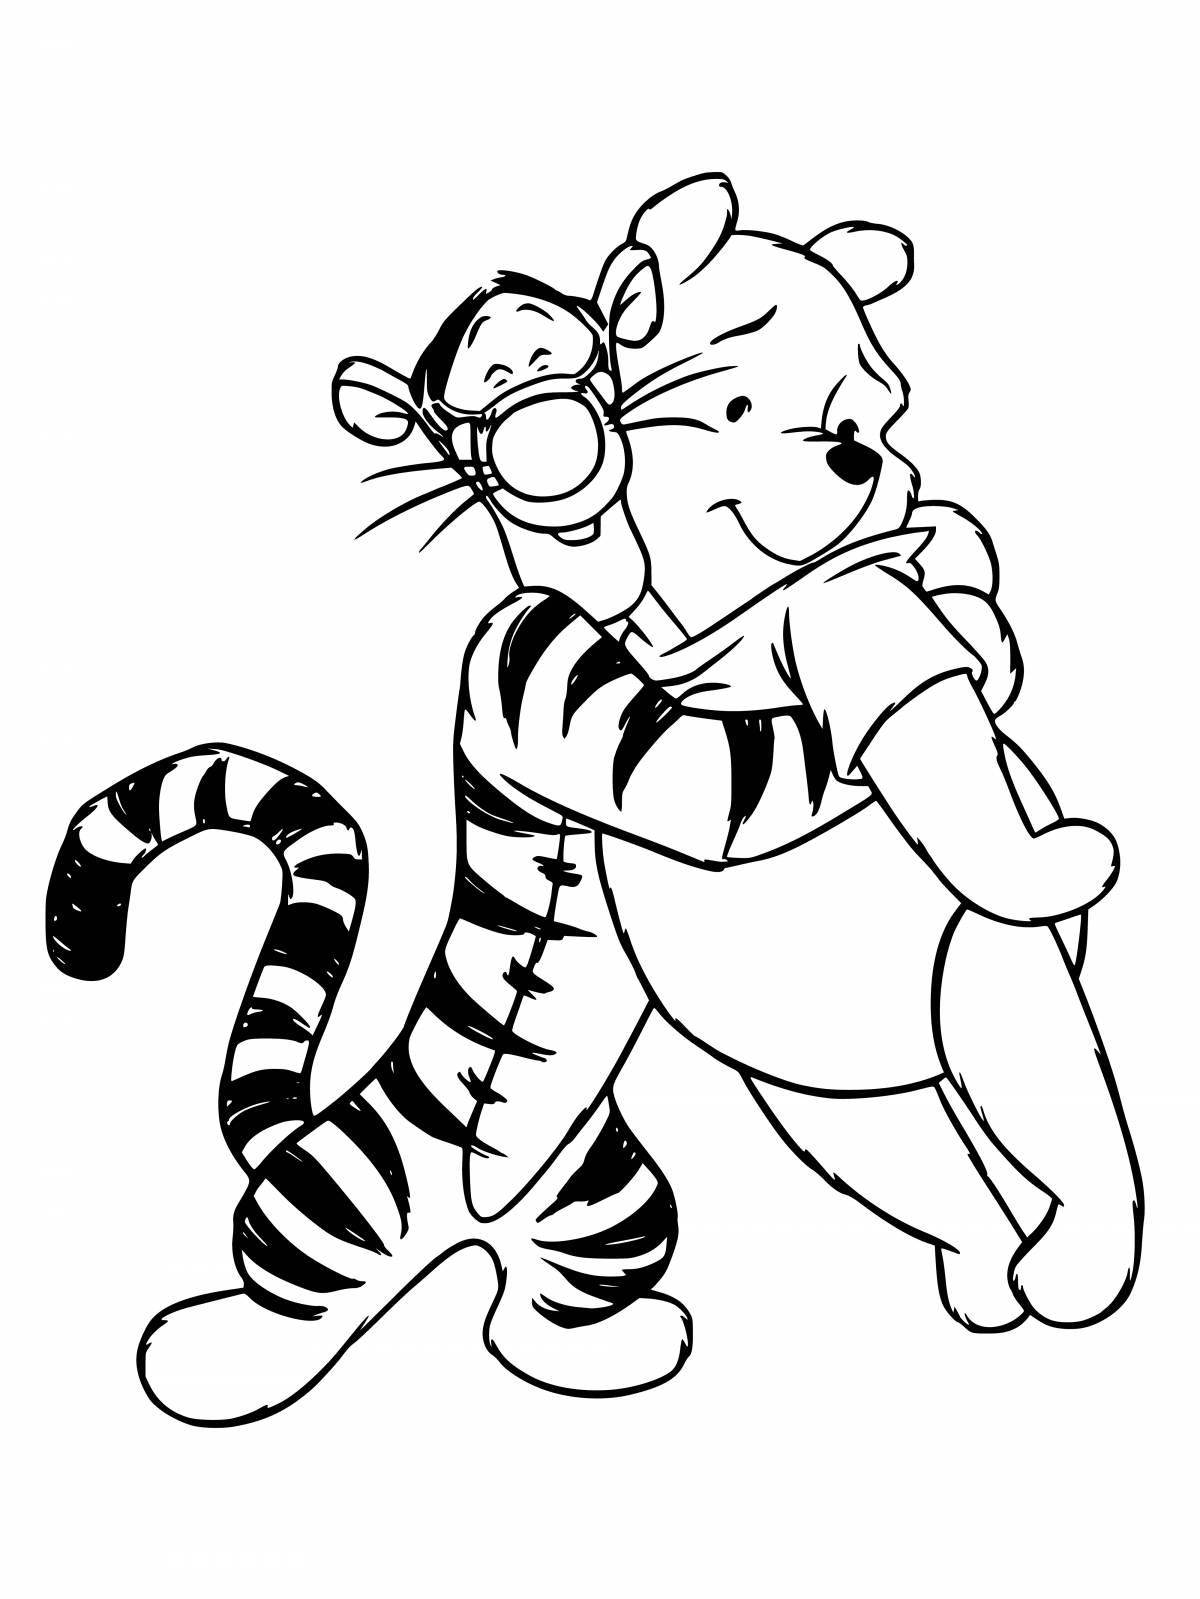 Blissful hug coloring pages